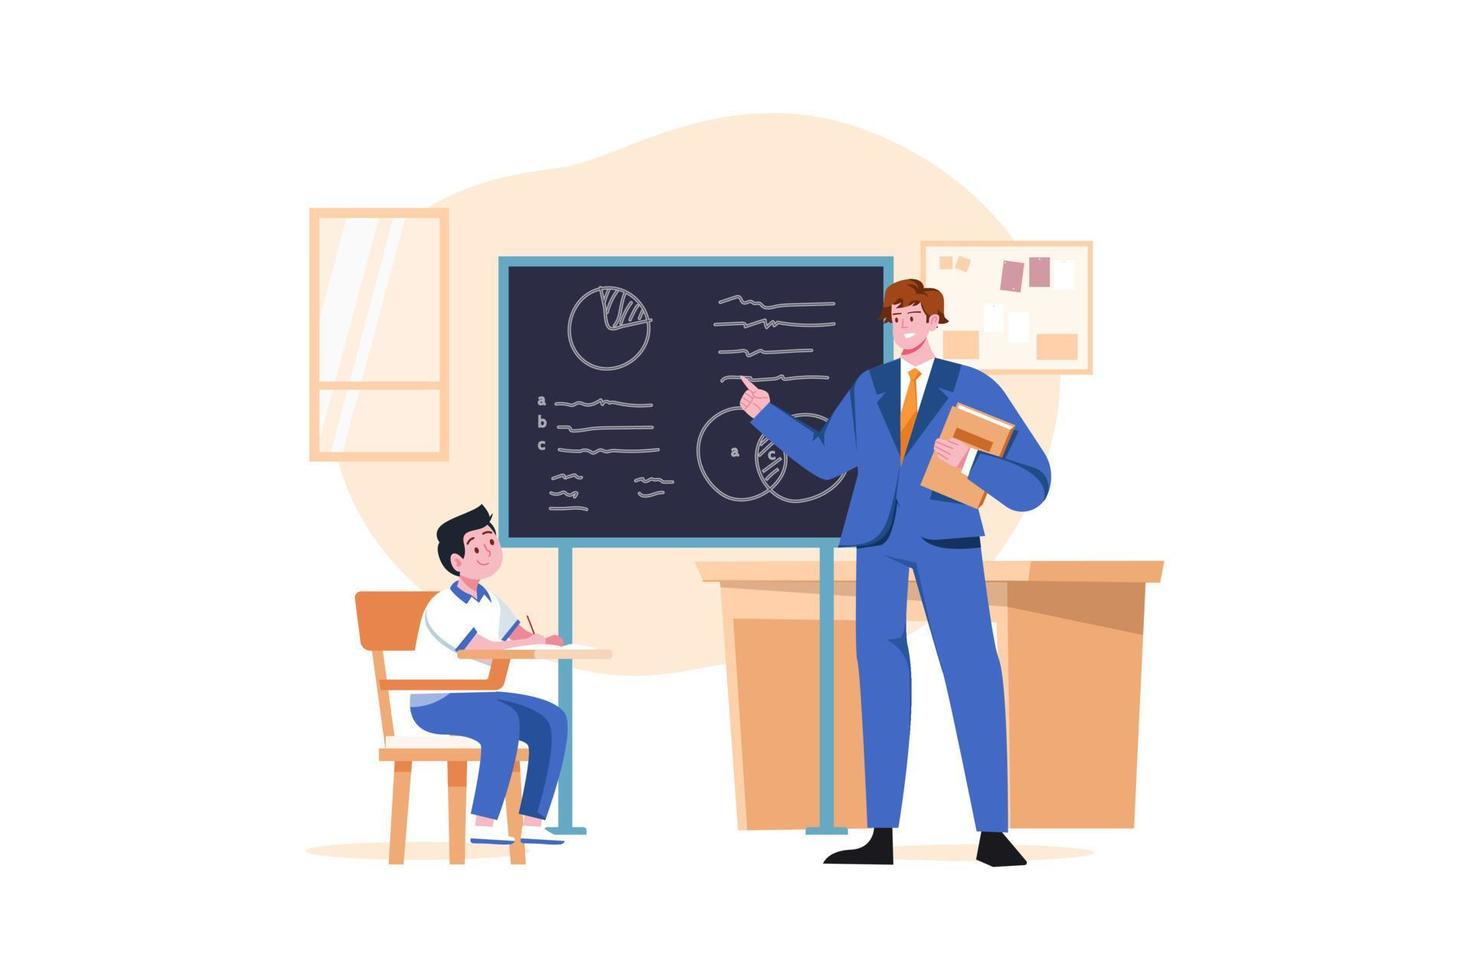 Math teacher giving a lecture to students Illustration concept on white background vector